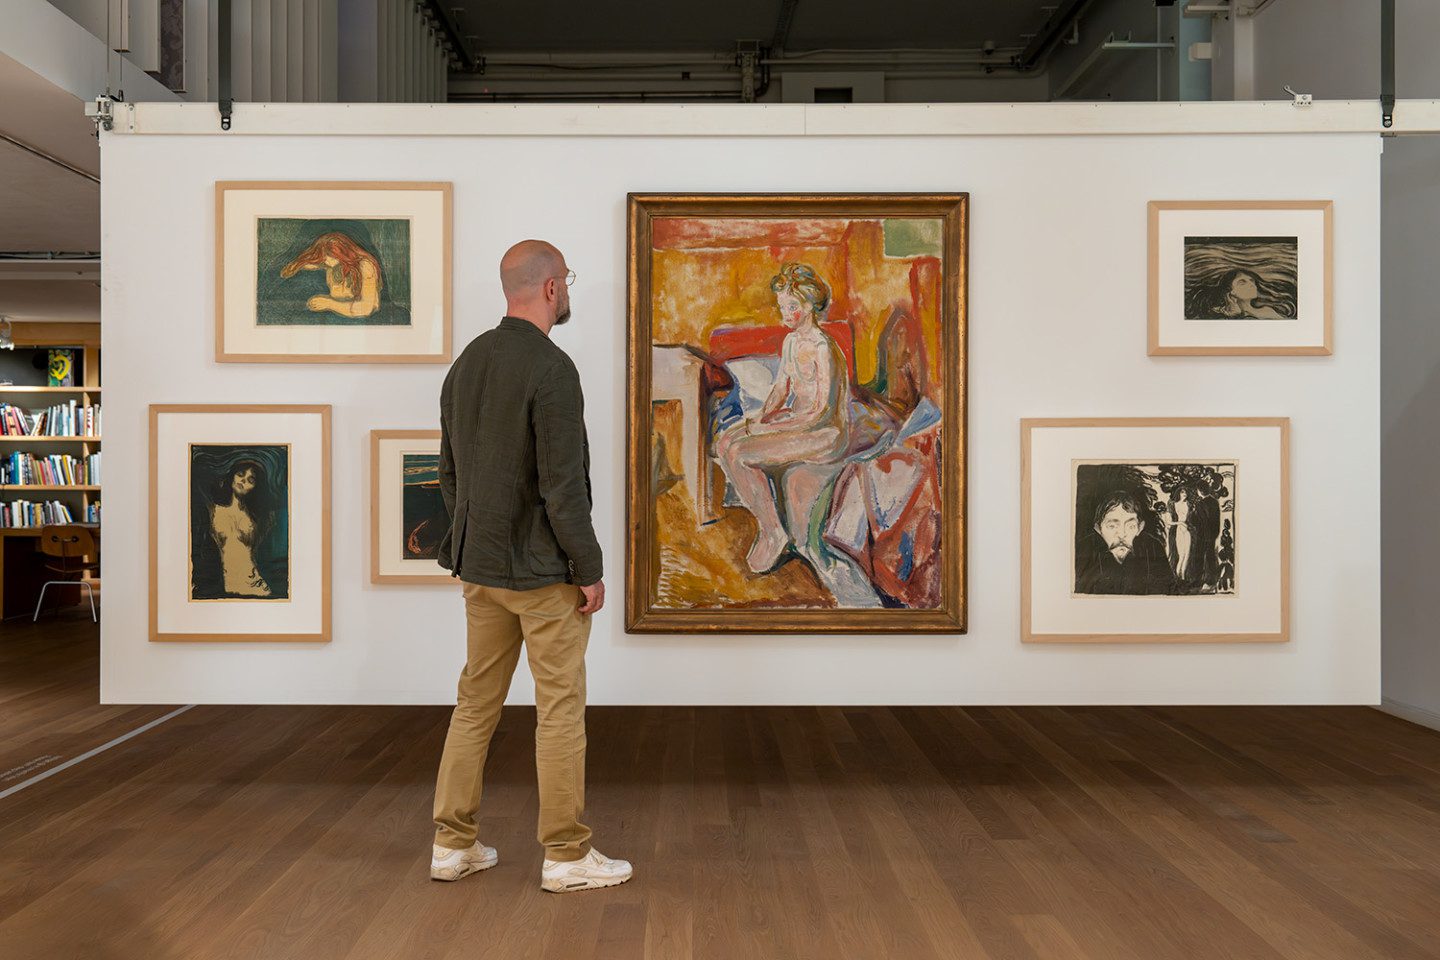 Photo of a person standing in front of one of the screens of the Study Gallery, the frame holds paintings by artist Edvard Munch